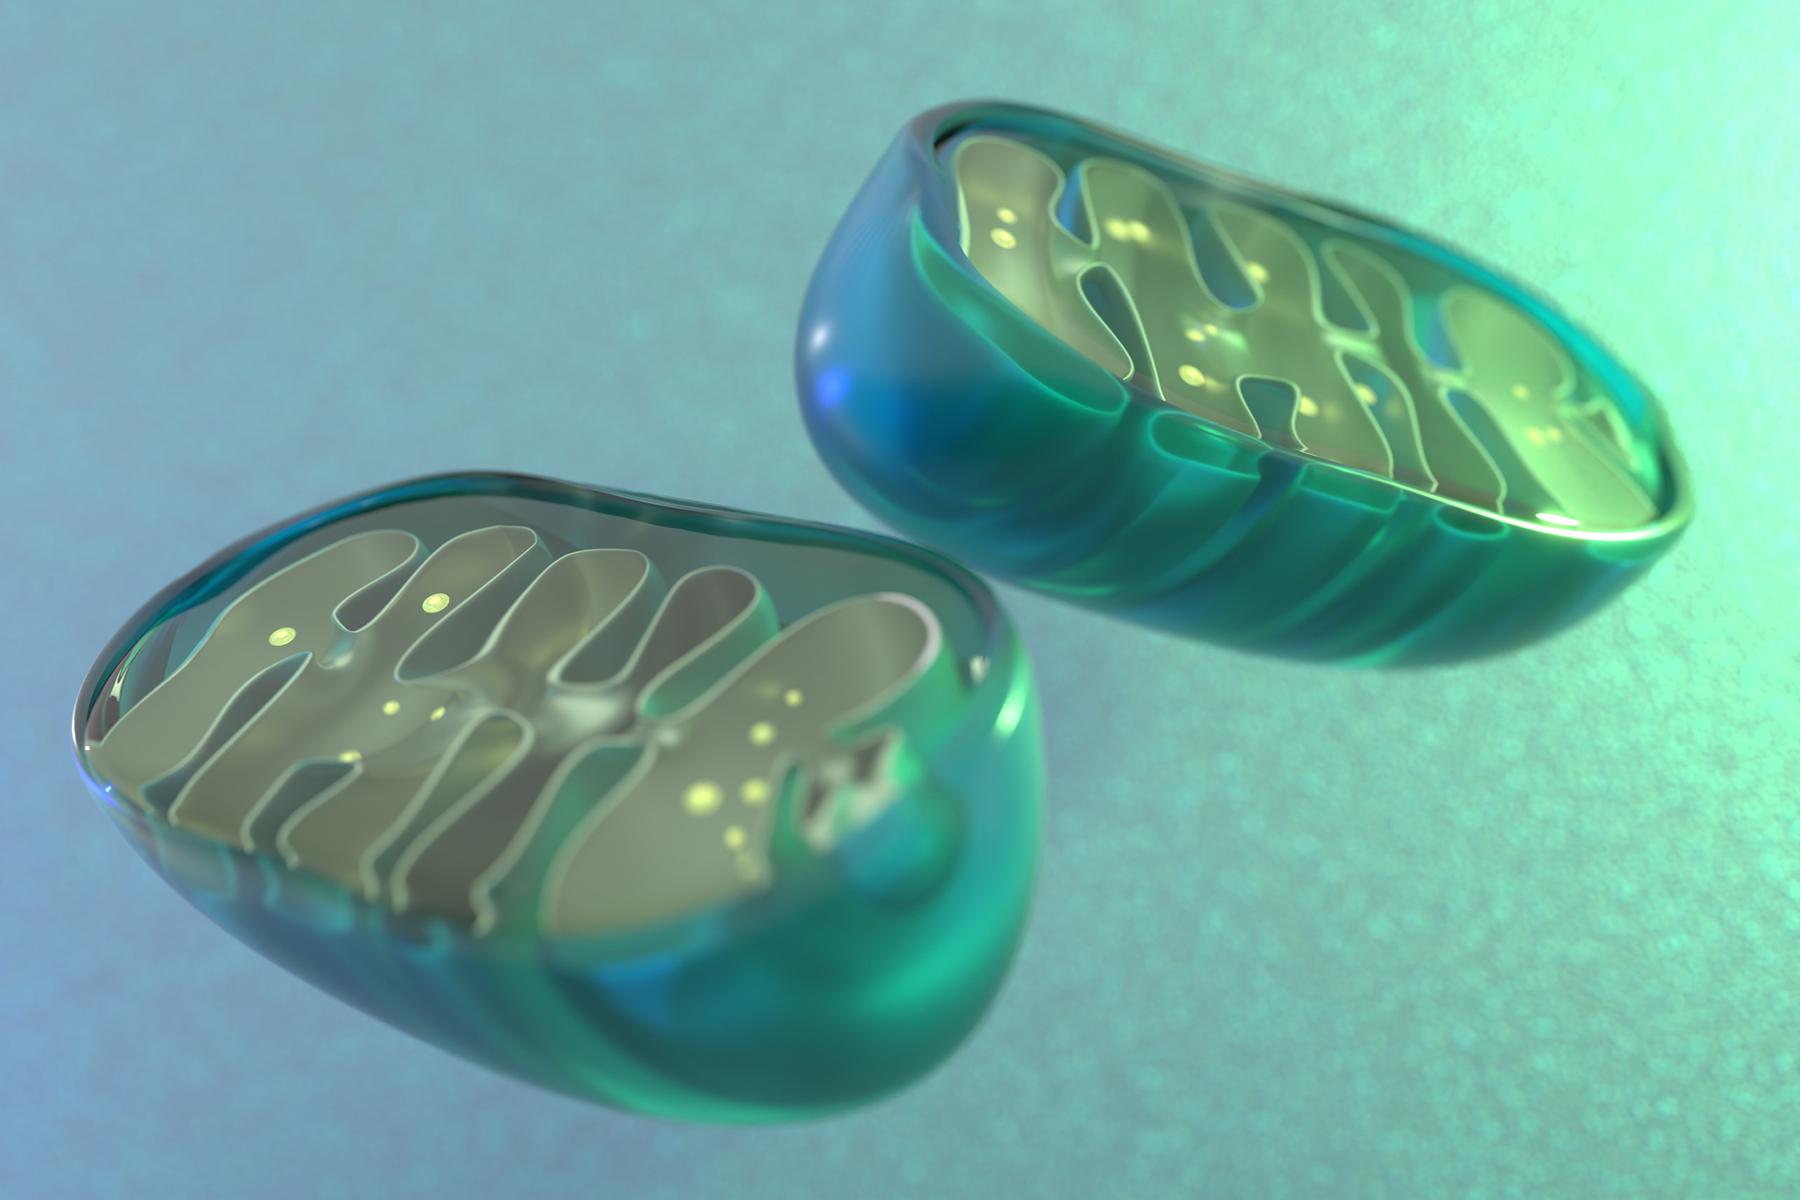 3d illustration of mitochondria showing their interior structure: pill-shaped with folded membranes and molecules moving throughout.